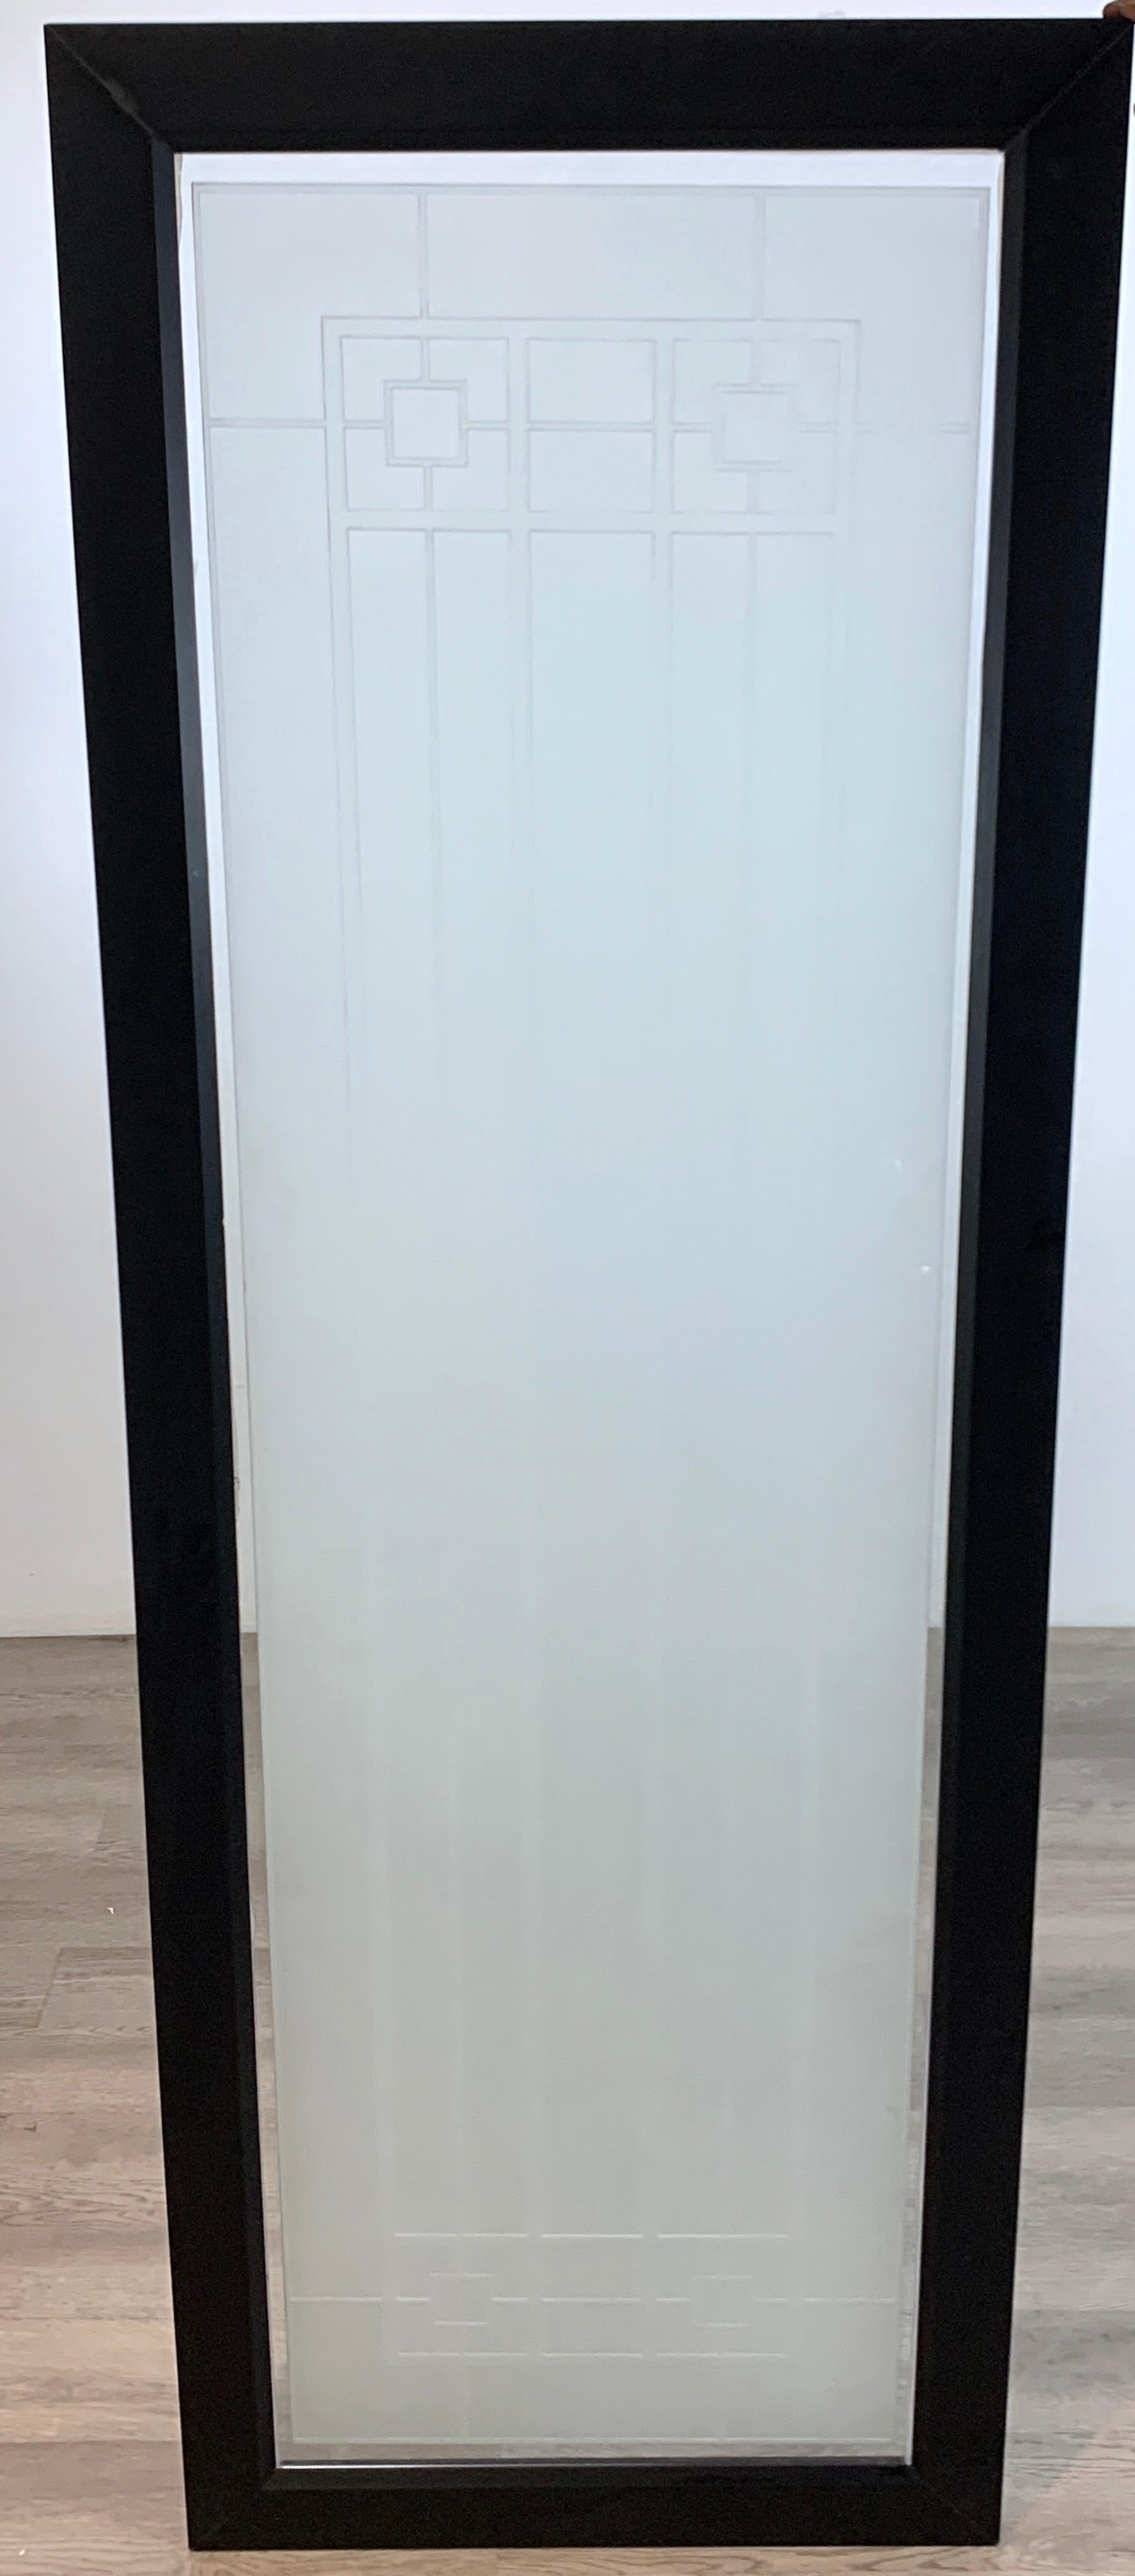 Tall prairie style frosted glass window, Frank Lloyd wright style, 4 available
Hard to photograph, great size and scale, subtle beauty, each one housed in a blackened wood frame, ready to hang or re-install 
Measures: Glass panel 19